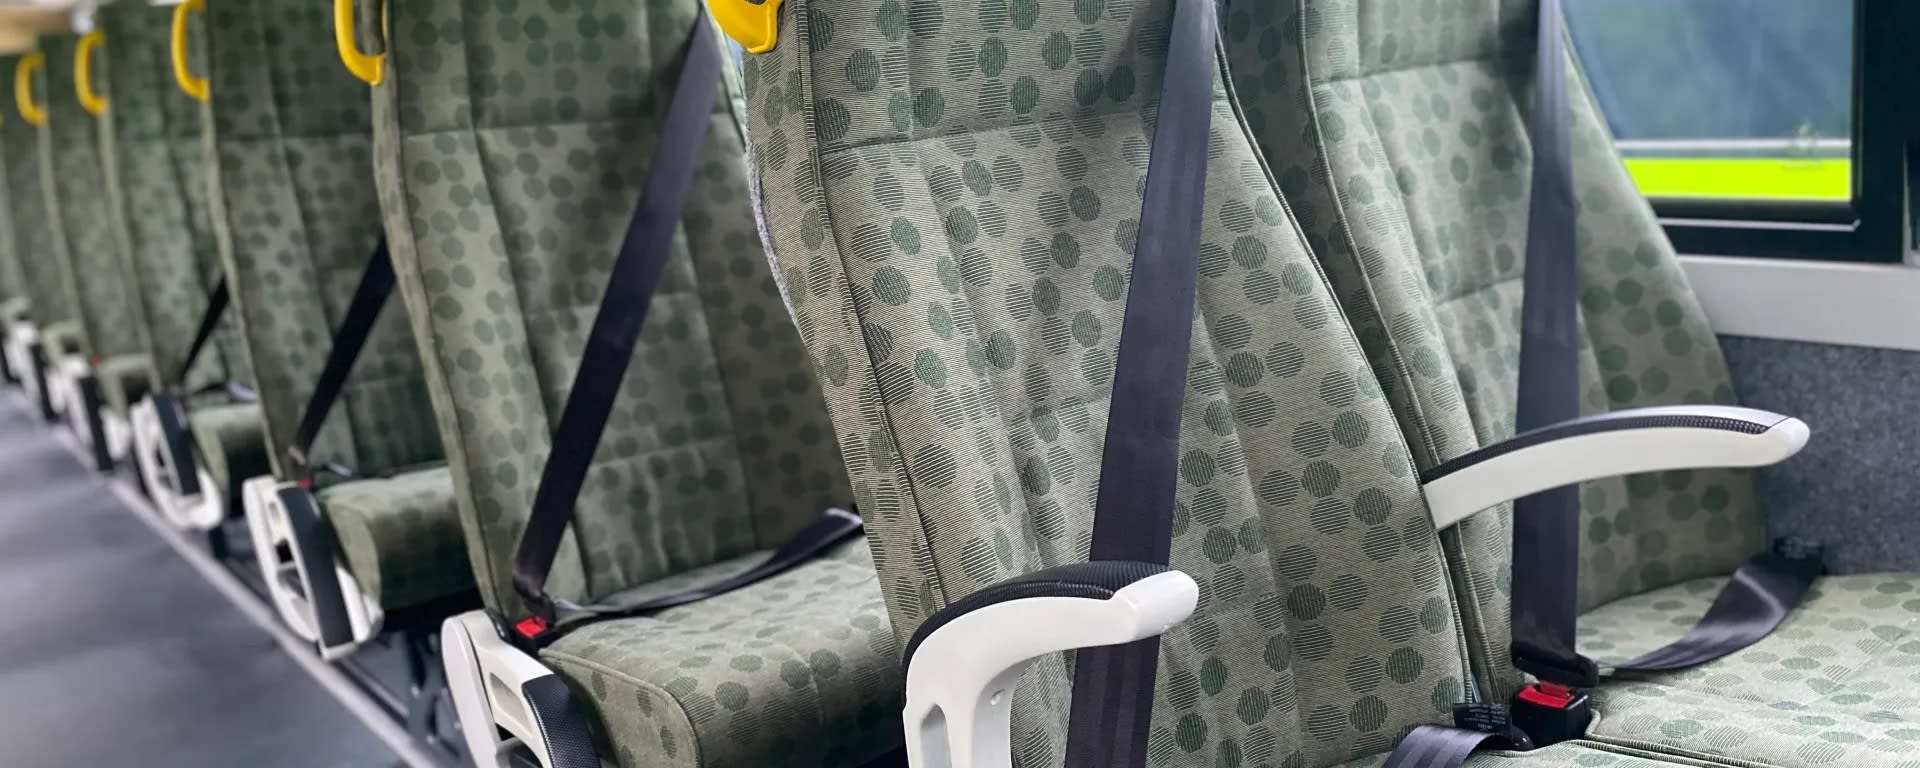 GO Transit is asking customers to buckle up when boarding new GO buses equipped with seatbelts.